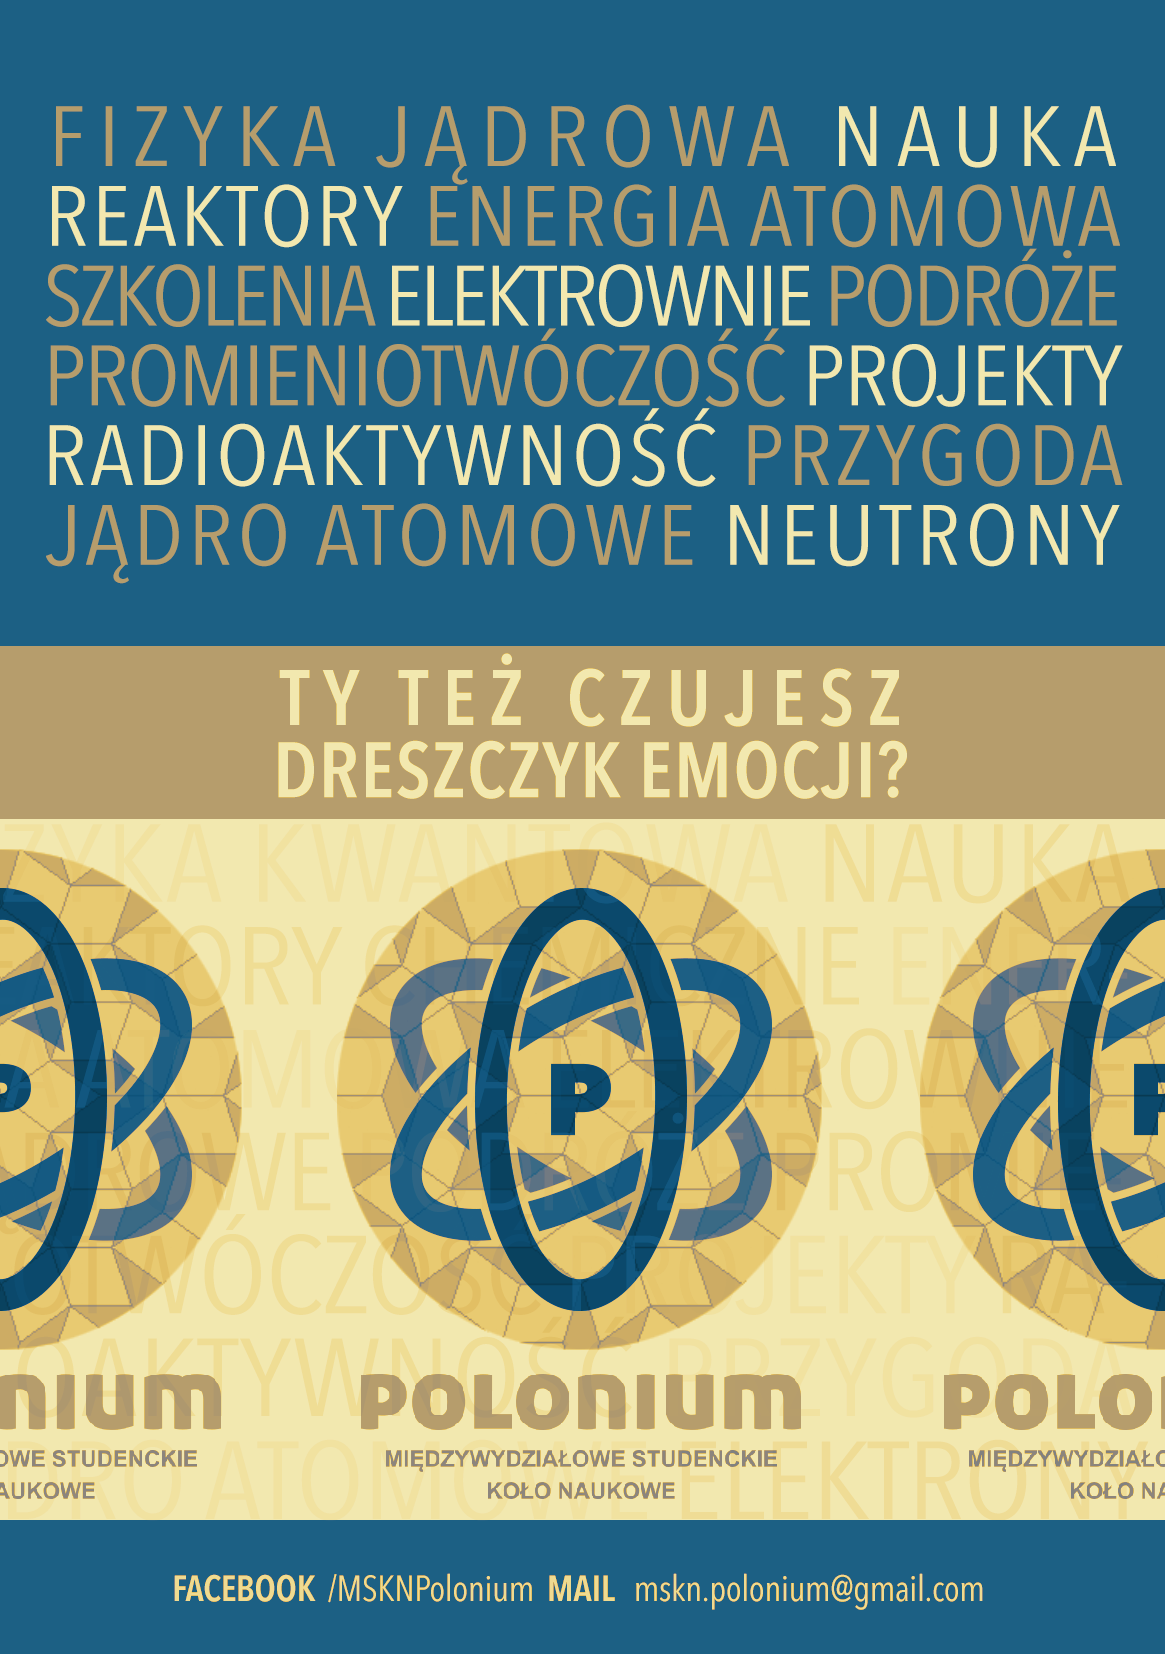 recruitment poster student science group research poznan University of Technology Polonium martyna Debicka miyo